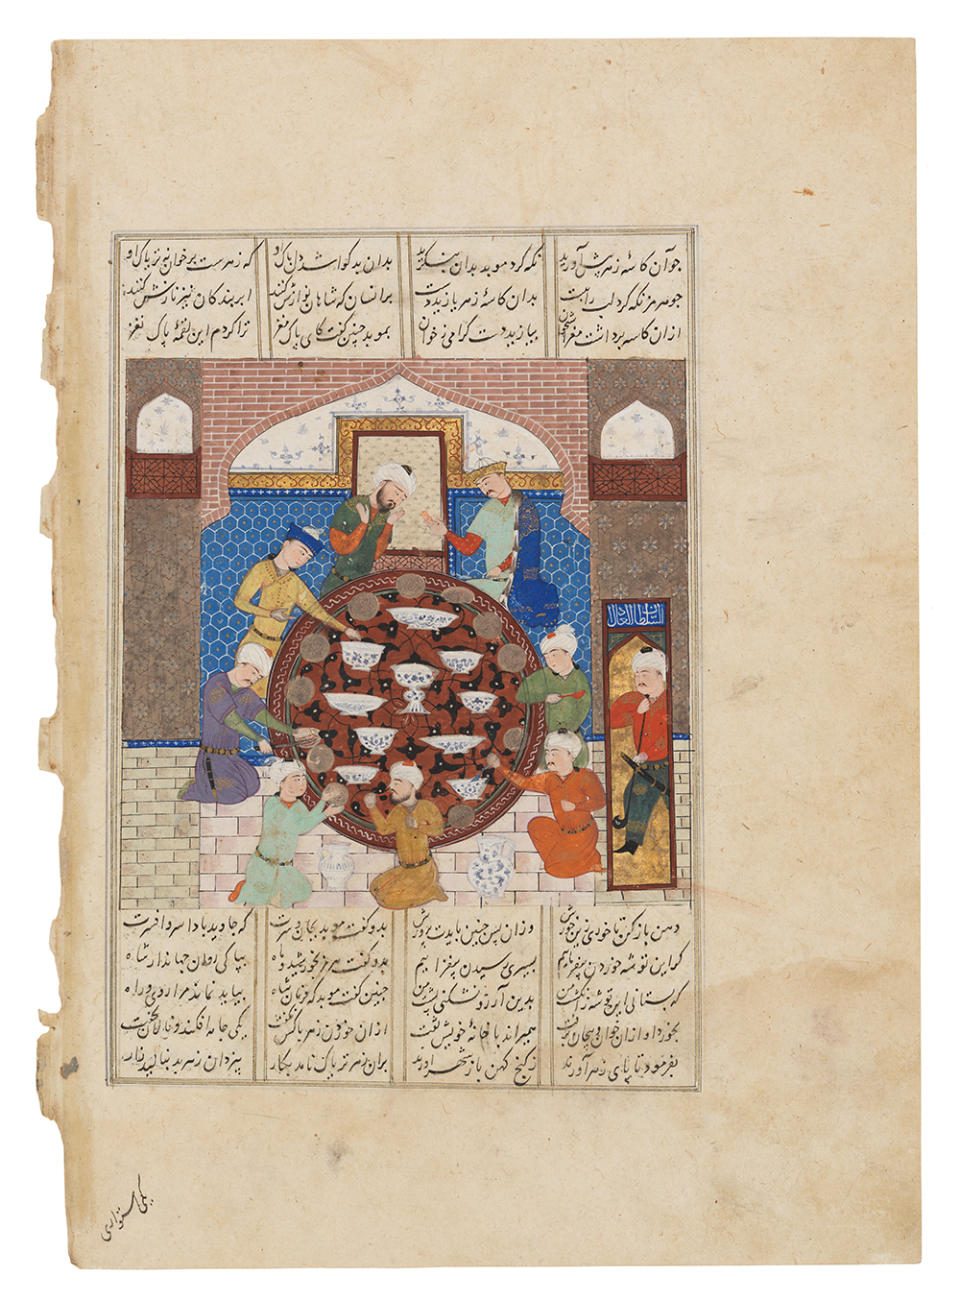 The Poet 'Ata'i Talking to a Learned Man in a Tavern by Atai (Walters MS 666)